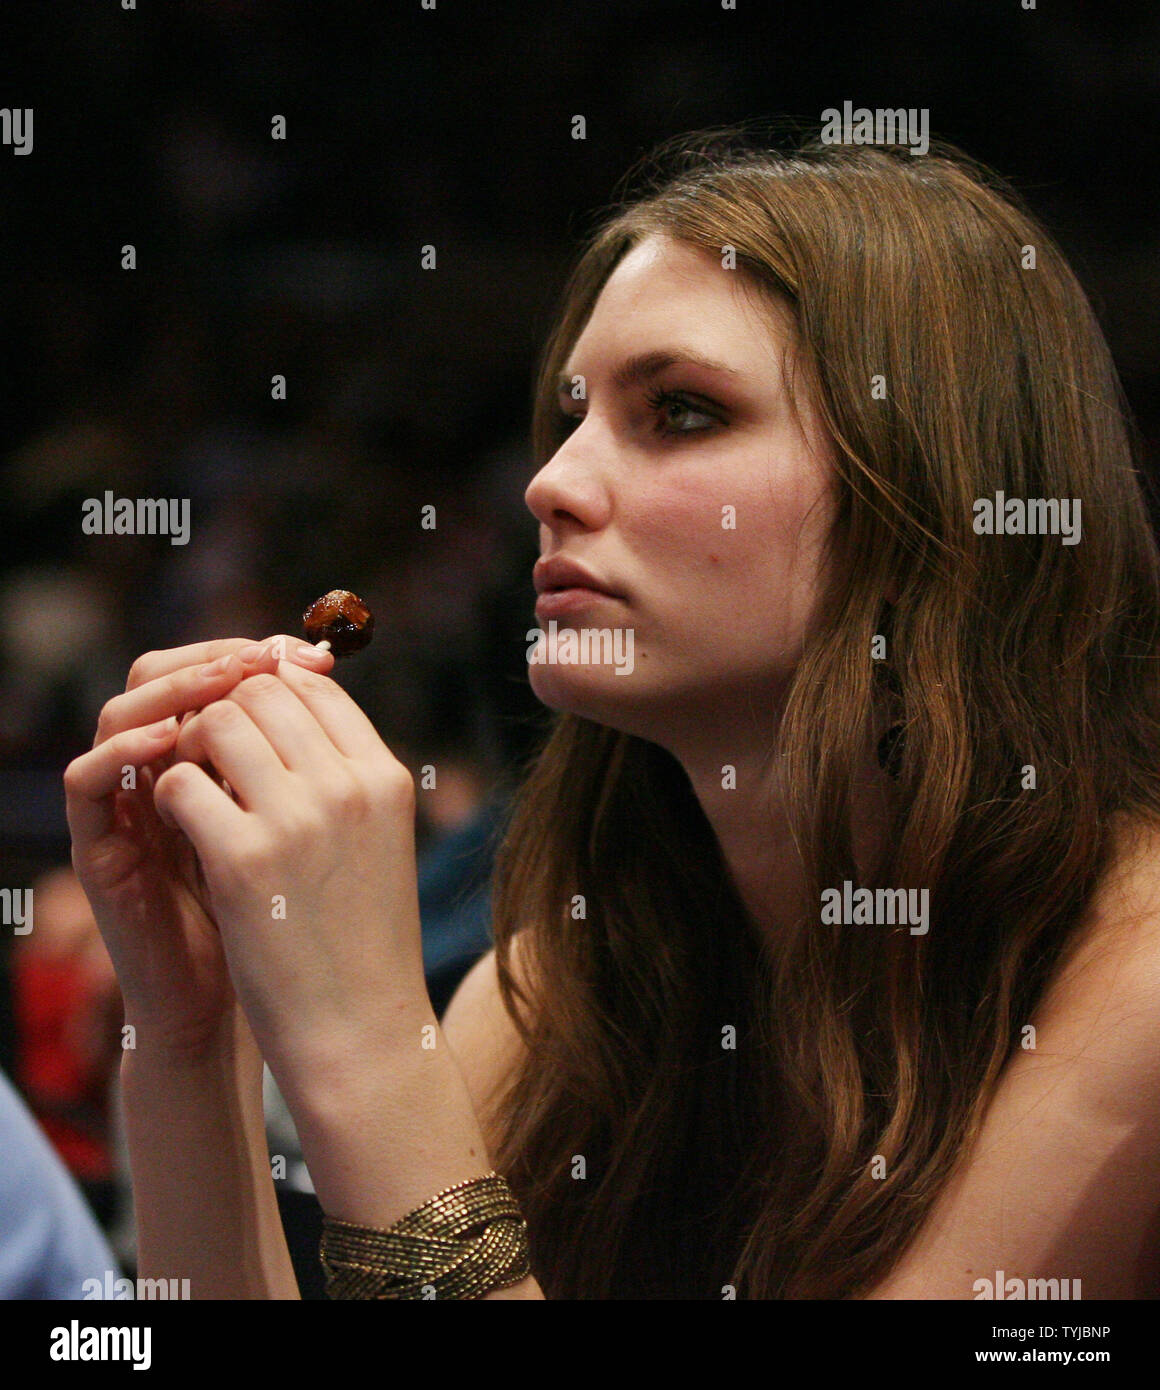 Kristy McQuade has a lollypop at the New York Knicks Seattle Supersonics game at Madison Square Garden in New York City on December 12, 2007. The Seattle SuperSonics defeated the New York Knicks 117-110.   (UPI Photo/John Angelillo) Stock Photo